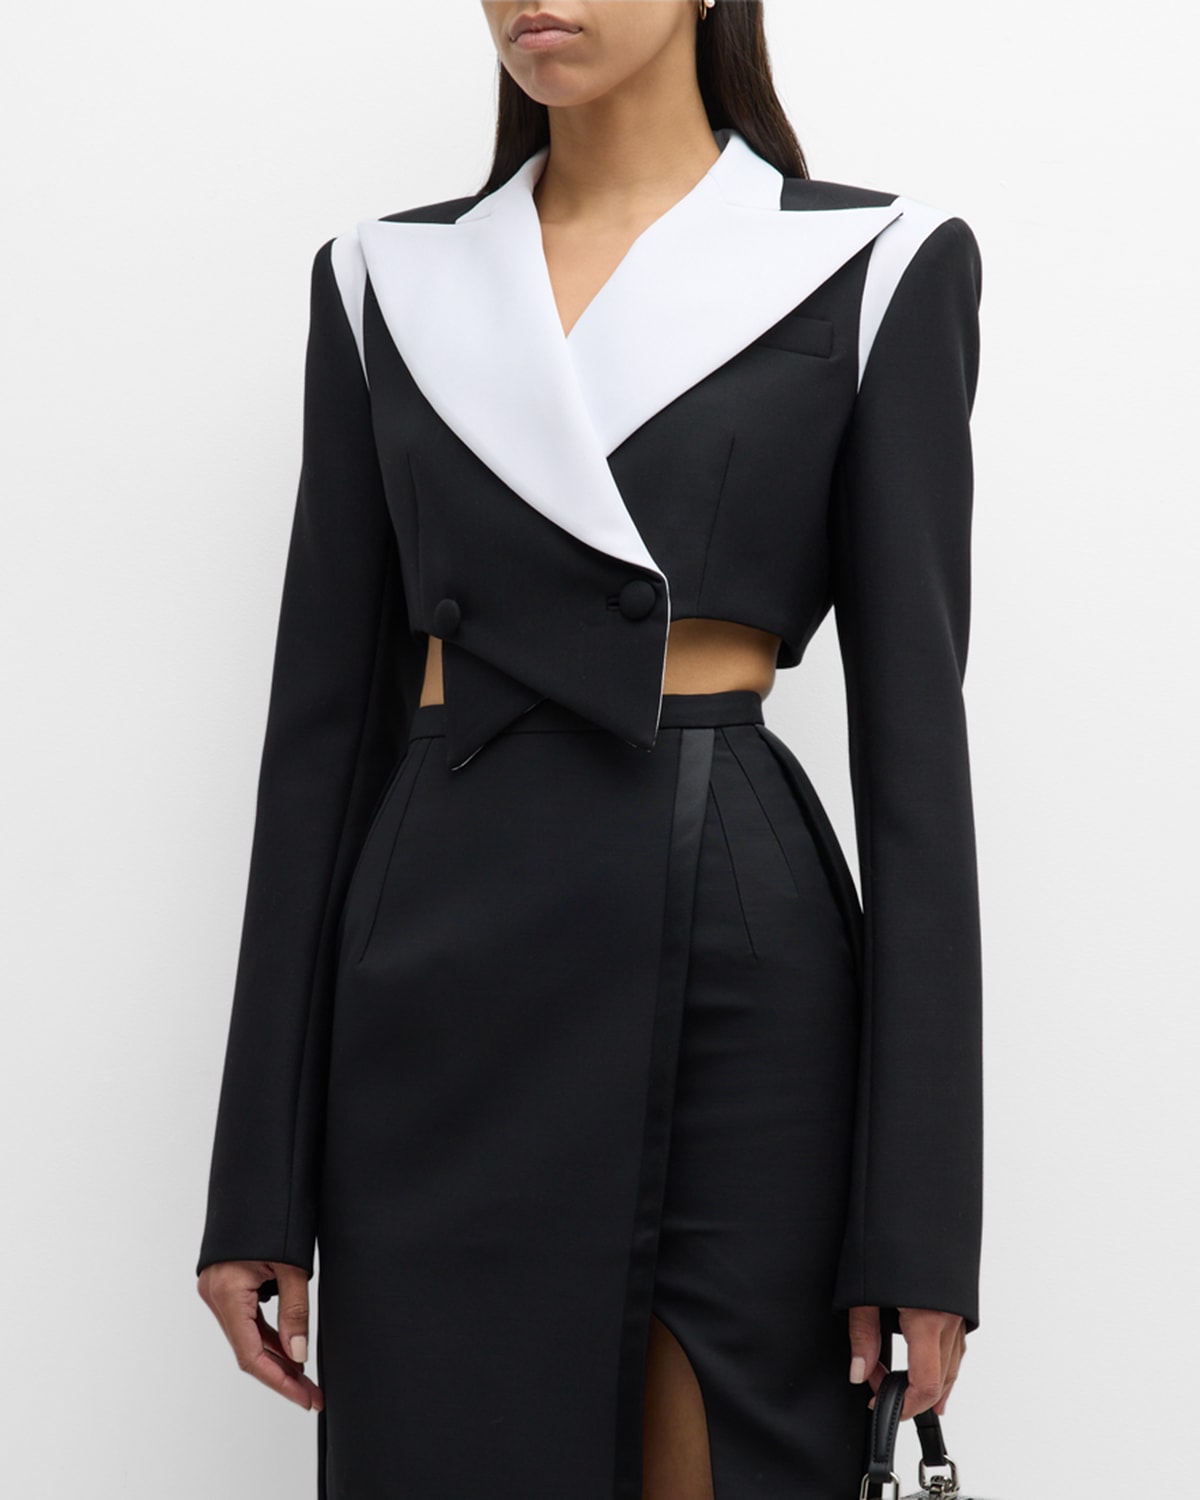 LAQUAN SMITH COLORBLOCK DOUBLE-BREASTED CROPPED BLAZER JACKET